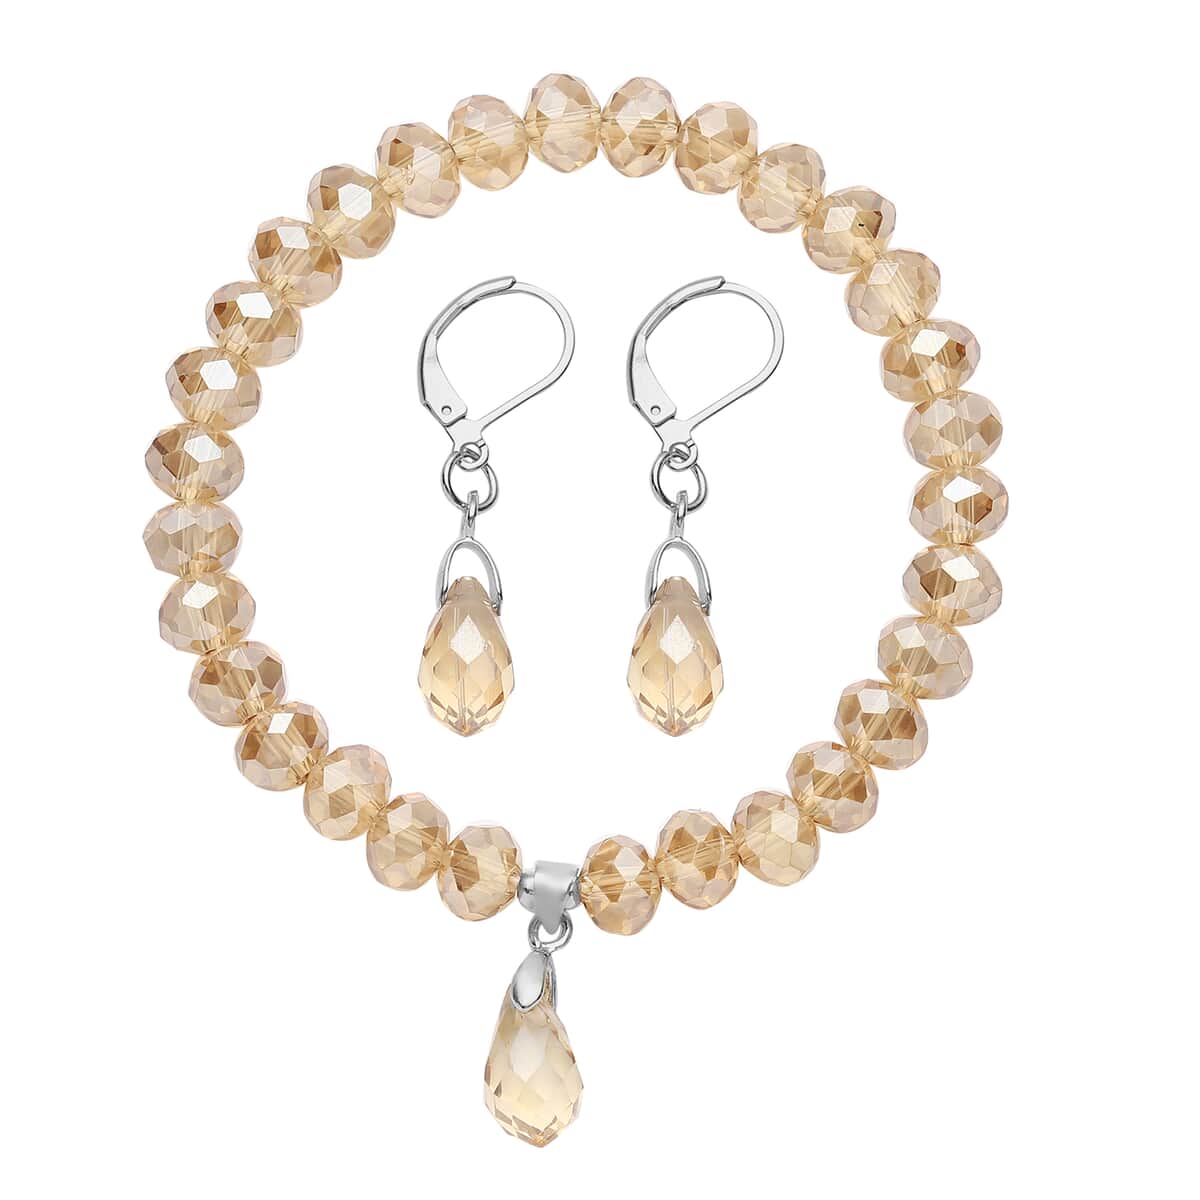 Simulated Champagne Quartz Beaded Bracelet (7-7.5In) and Drop Earrings in Silvertone & Stainless Steel image number 0